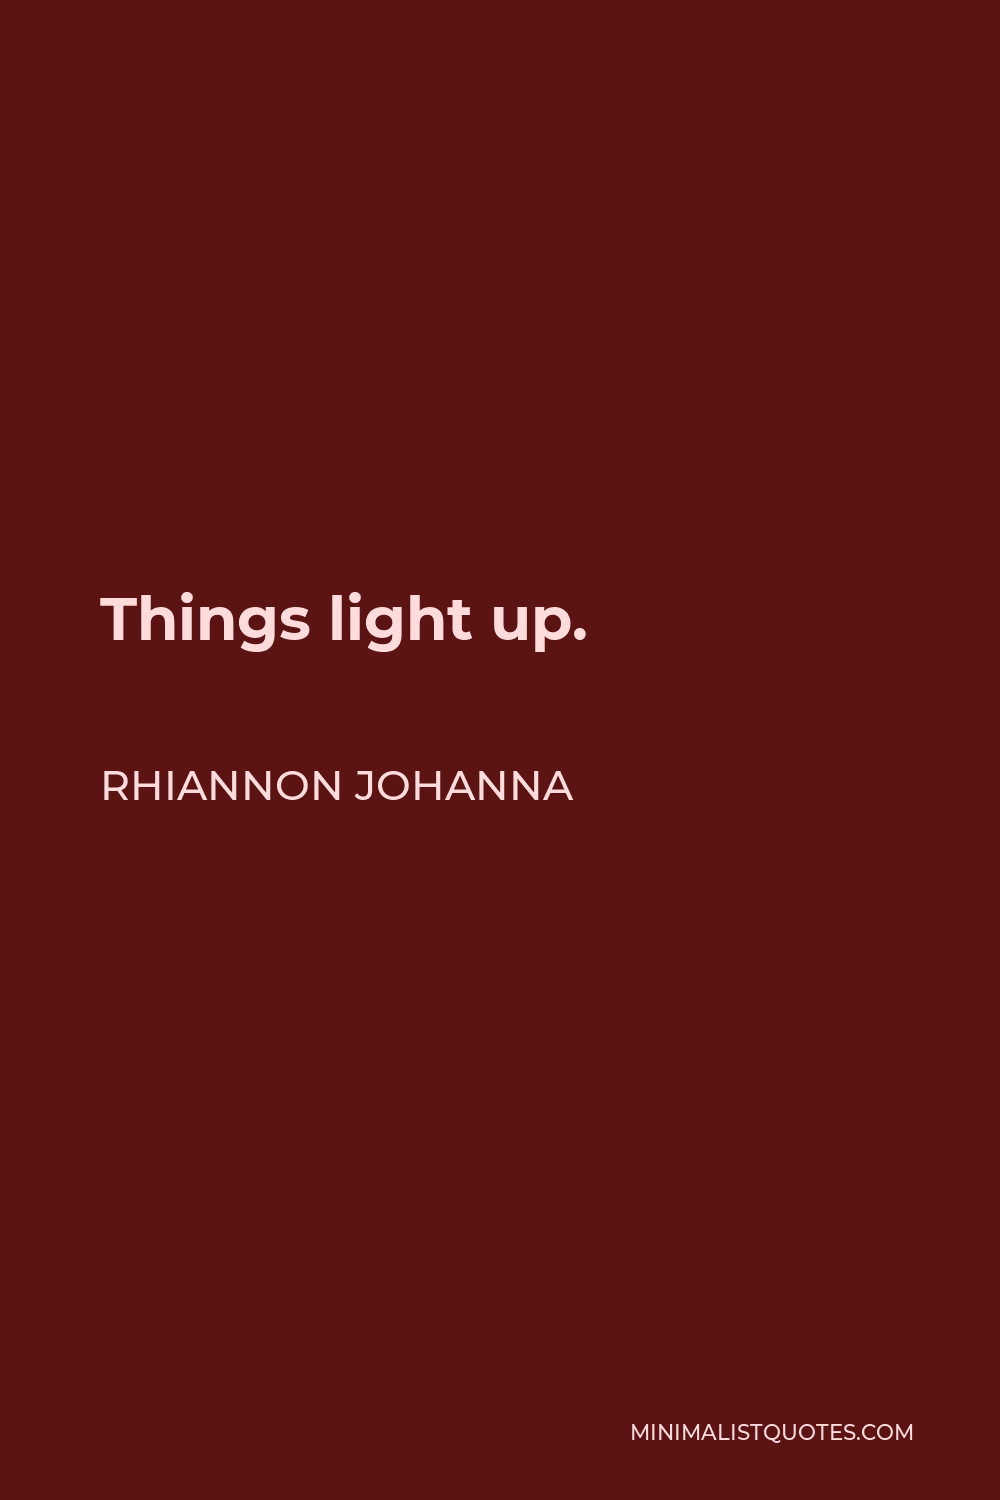 Rhiannon Johanna Quote - Things light up.